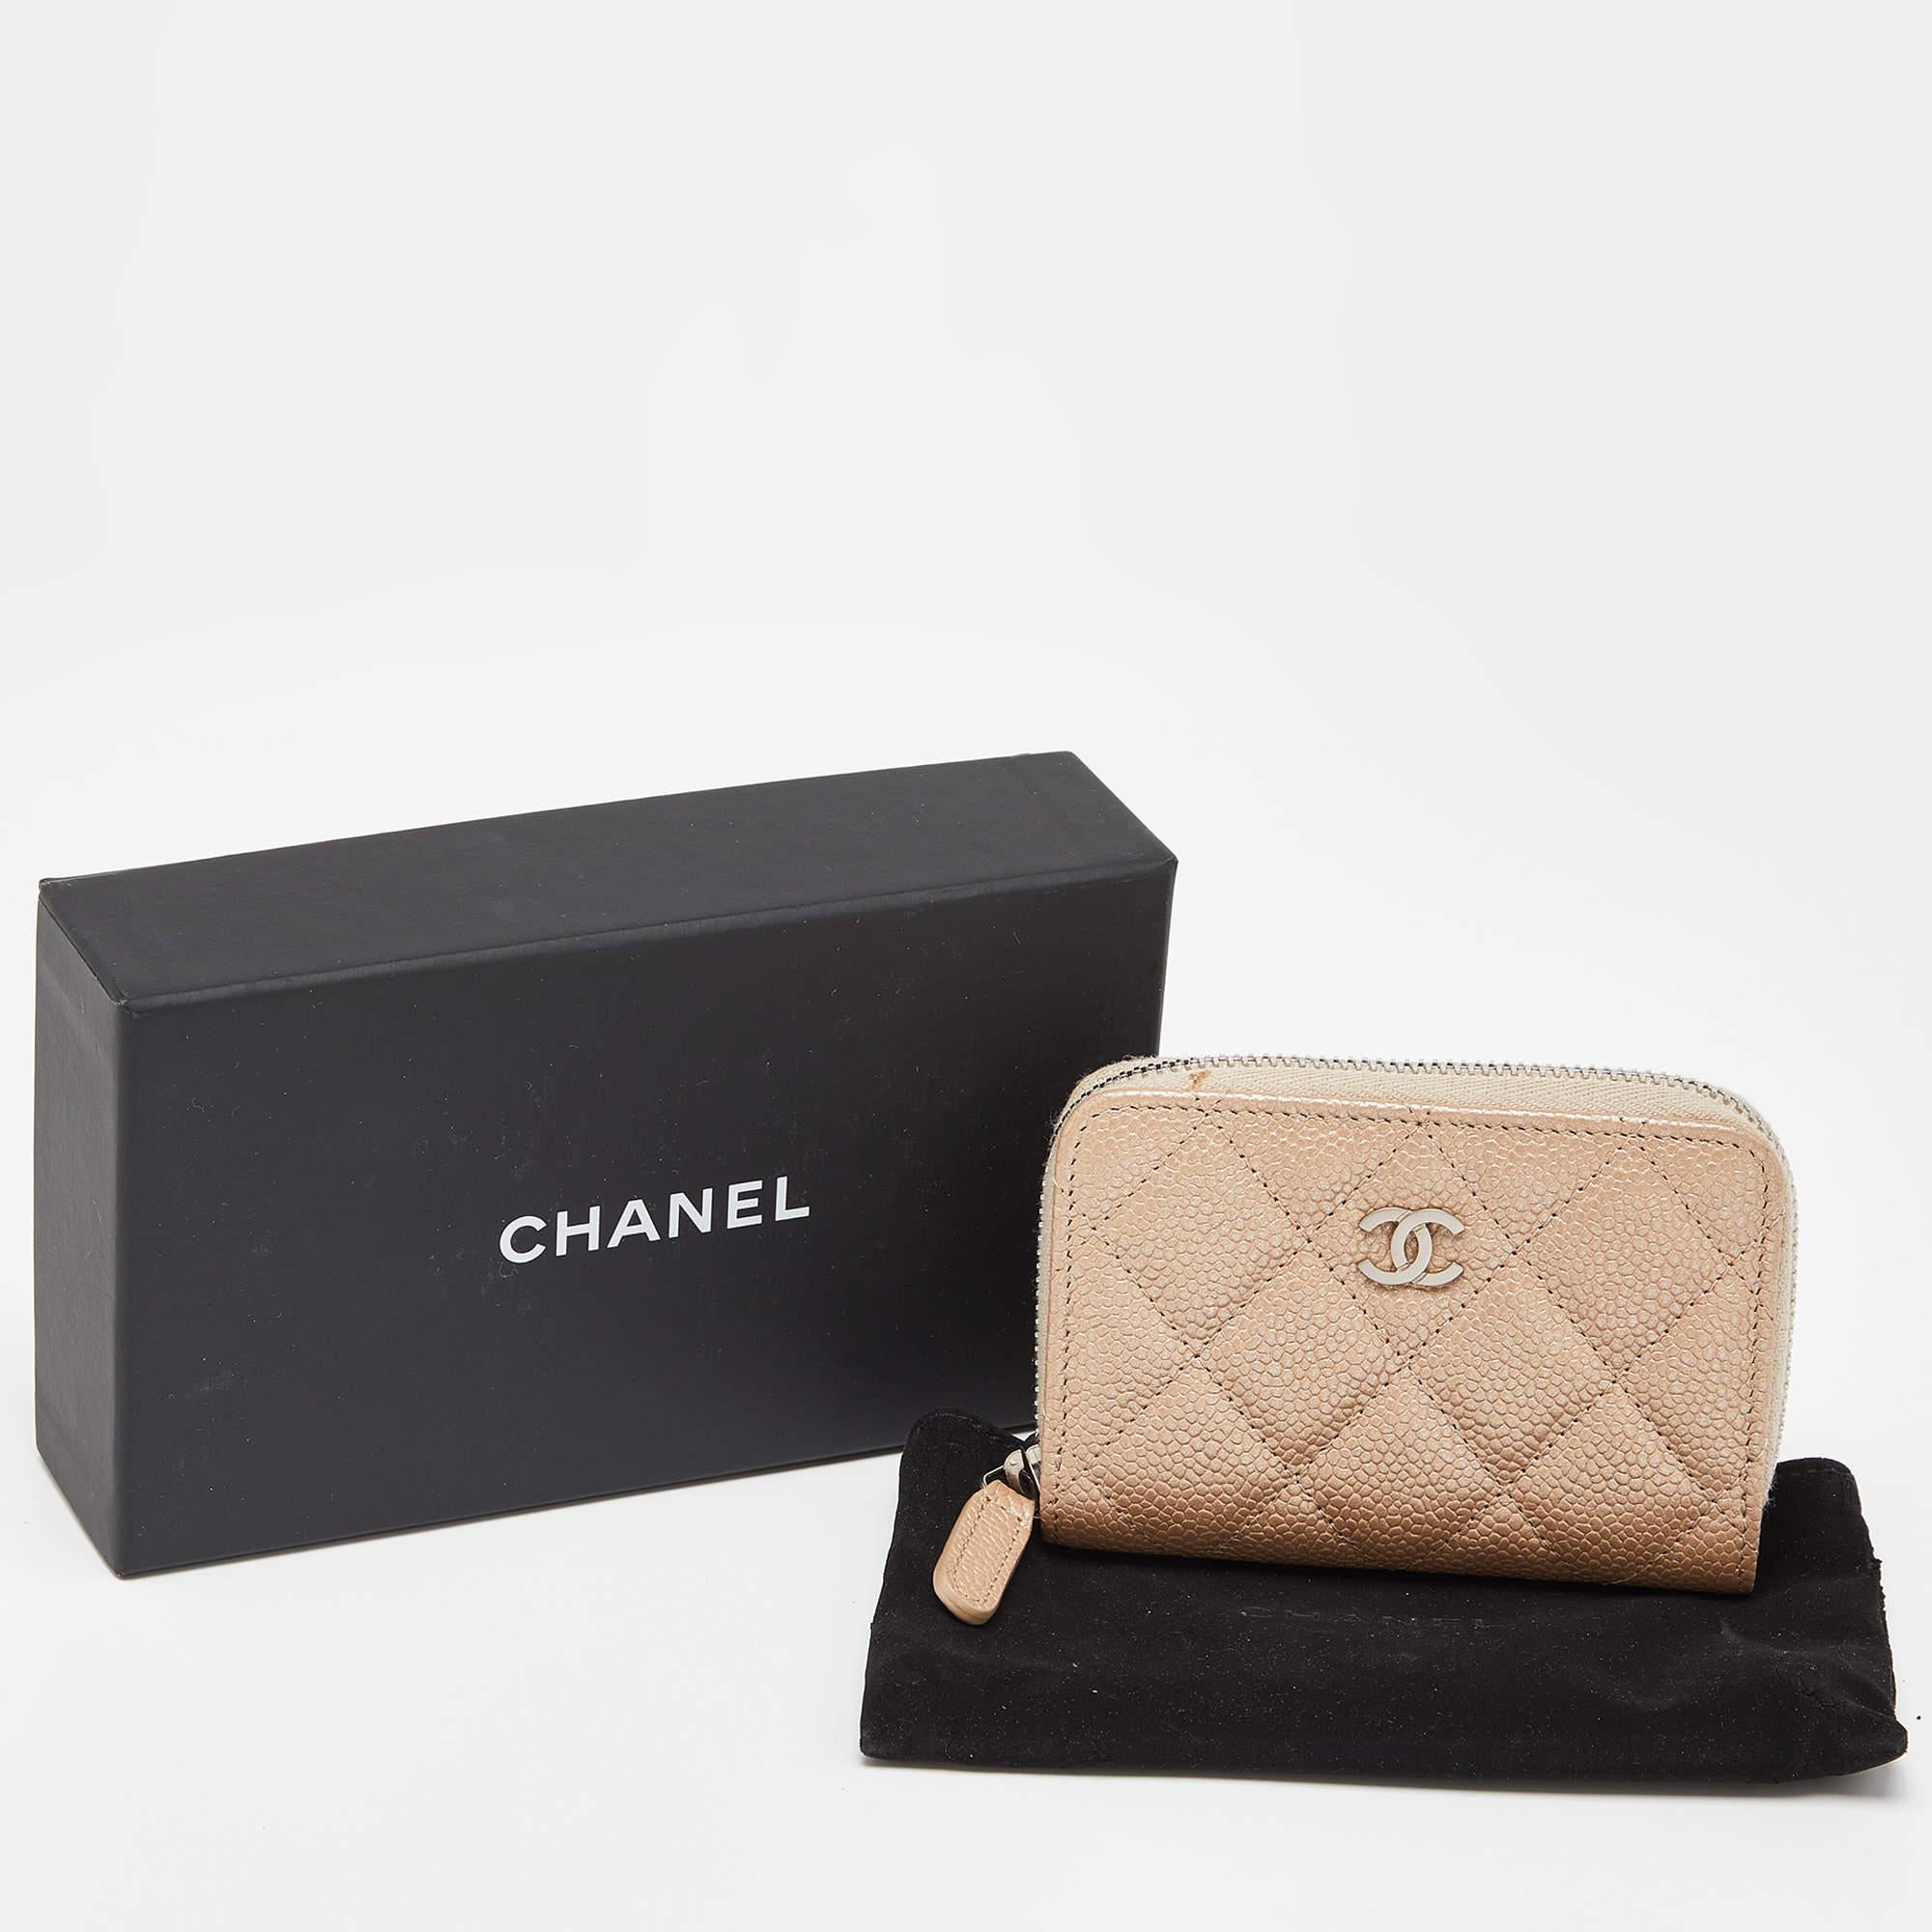 Chanel Beige Quilted Caviar Leather Zip Around Coin Purse In Excellent Condition For Sale In Dubai, Al Qouz 2